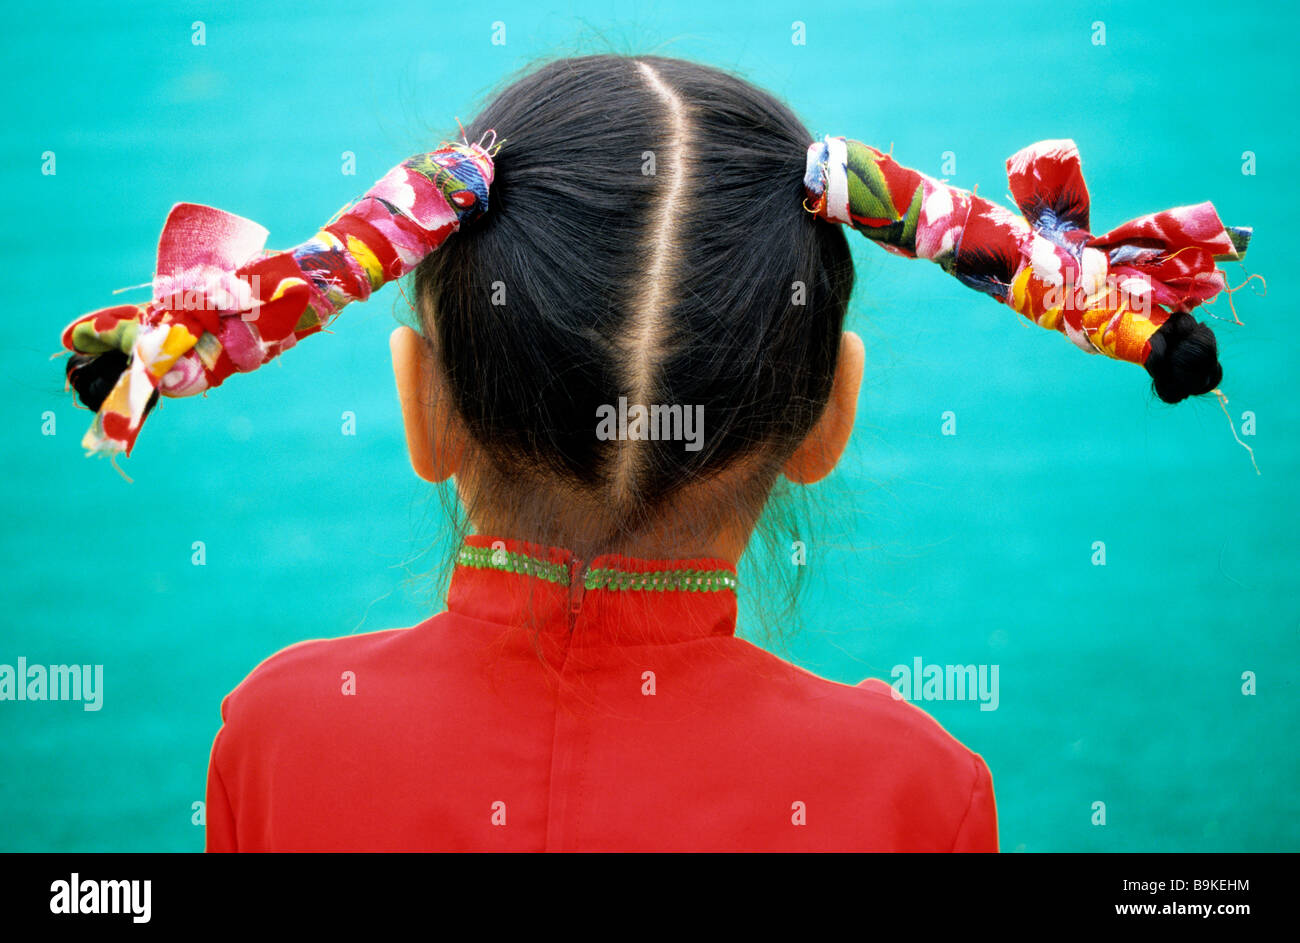 China, Sichuan Province, Chengdu, little girl from a band Stock Photo